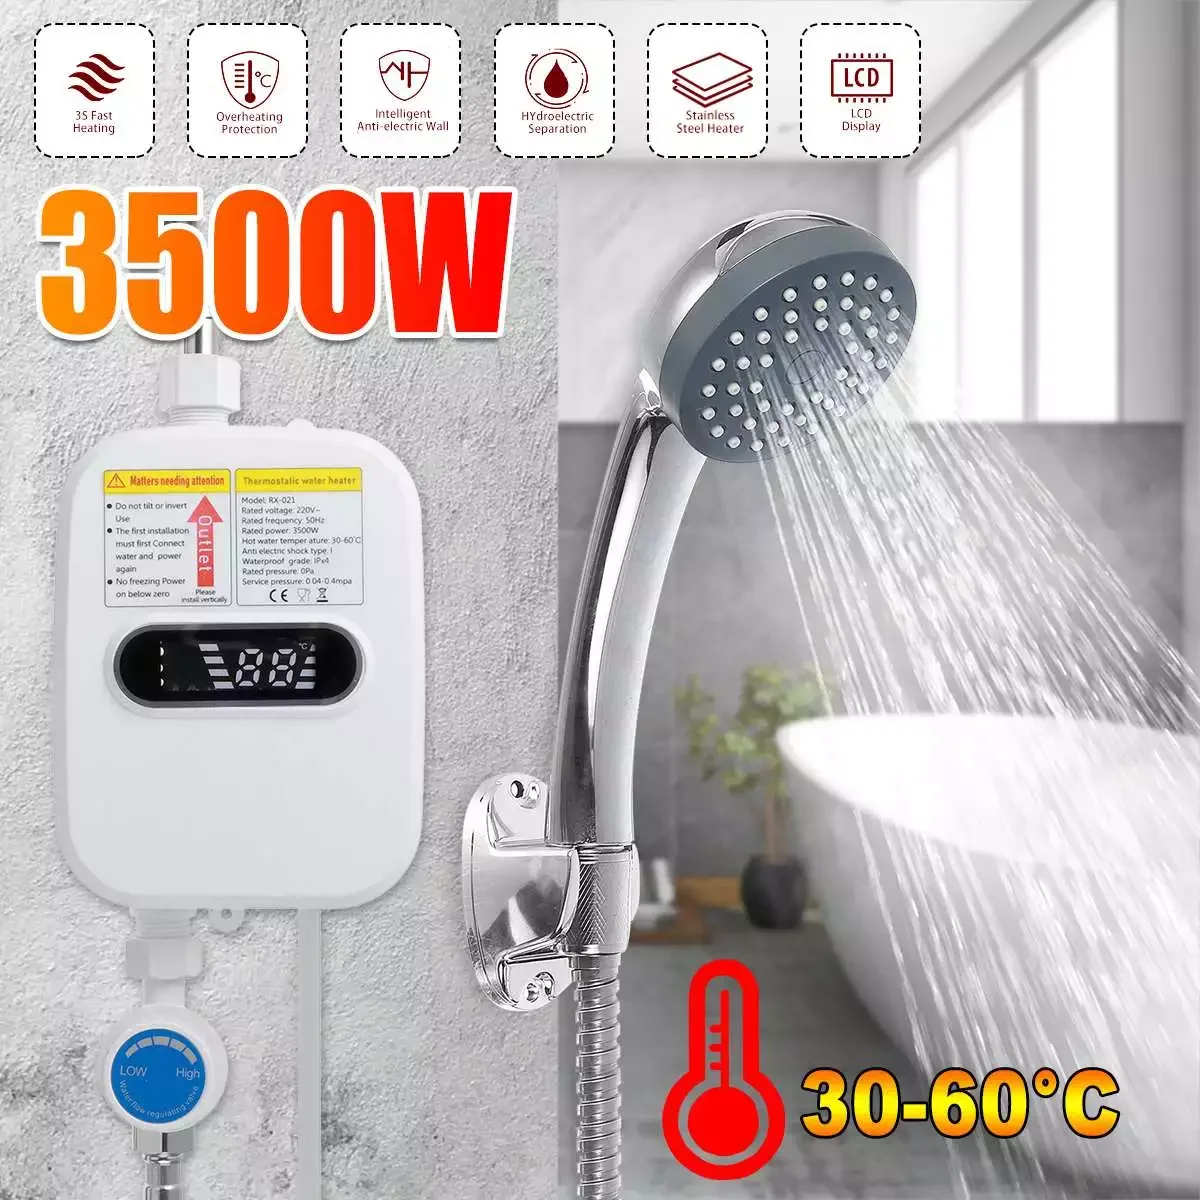 Enlarge 3s Heating 220V 3500W Electric Water Heater Instant Tankless Heater Bathroom Shower Multi-purpose Household Hot-Water Heater